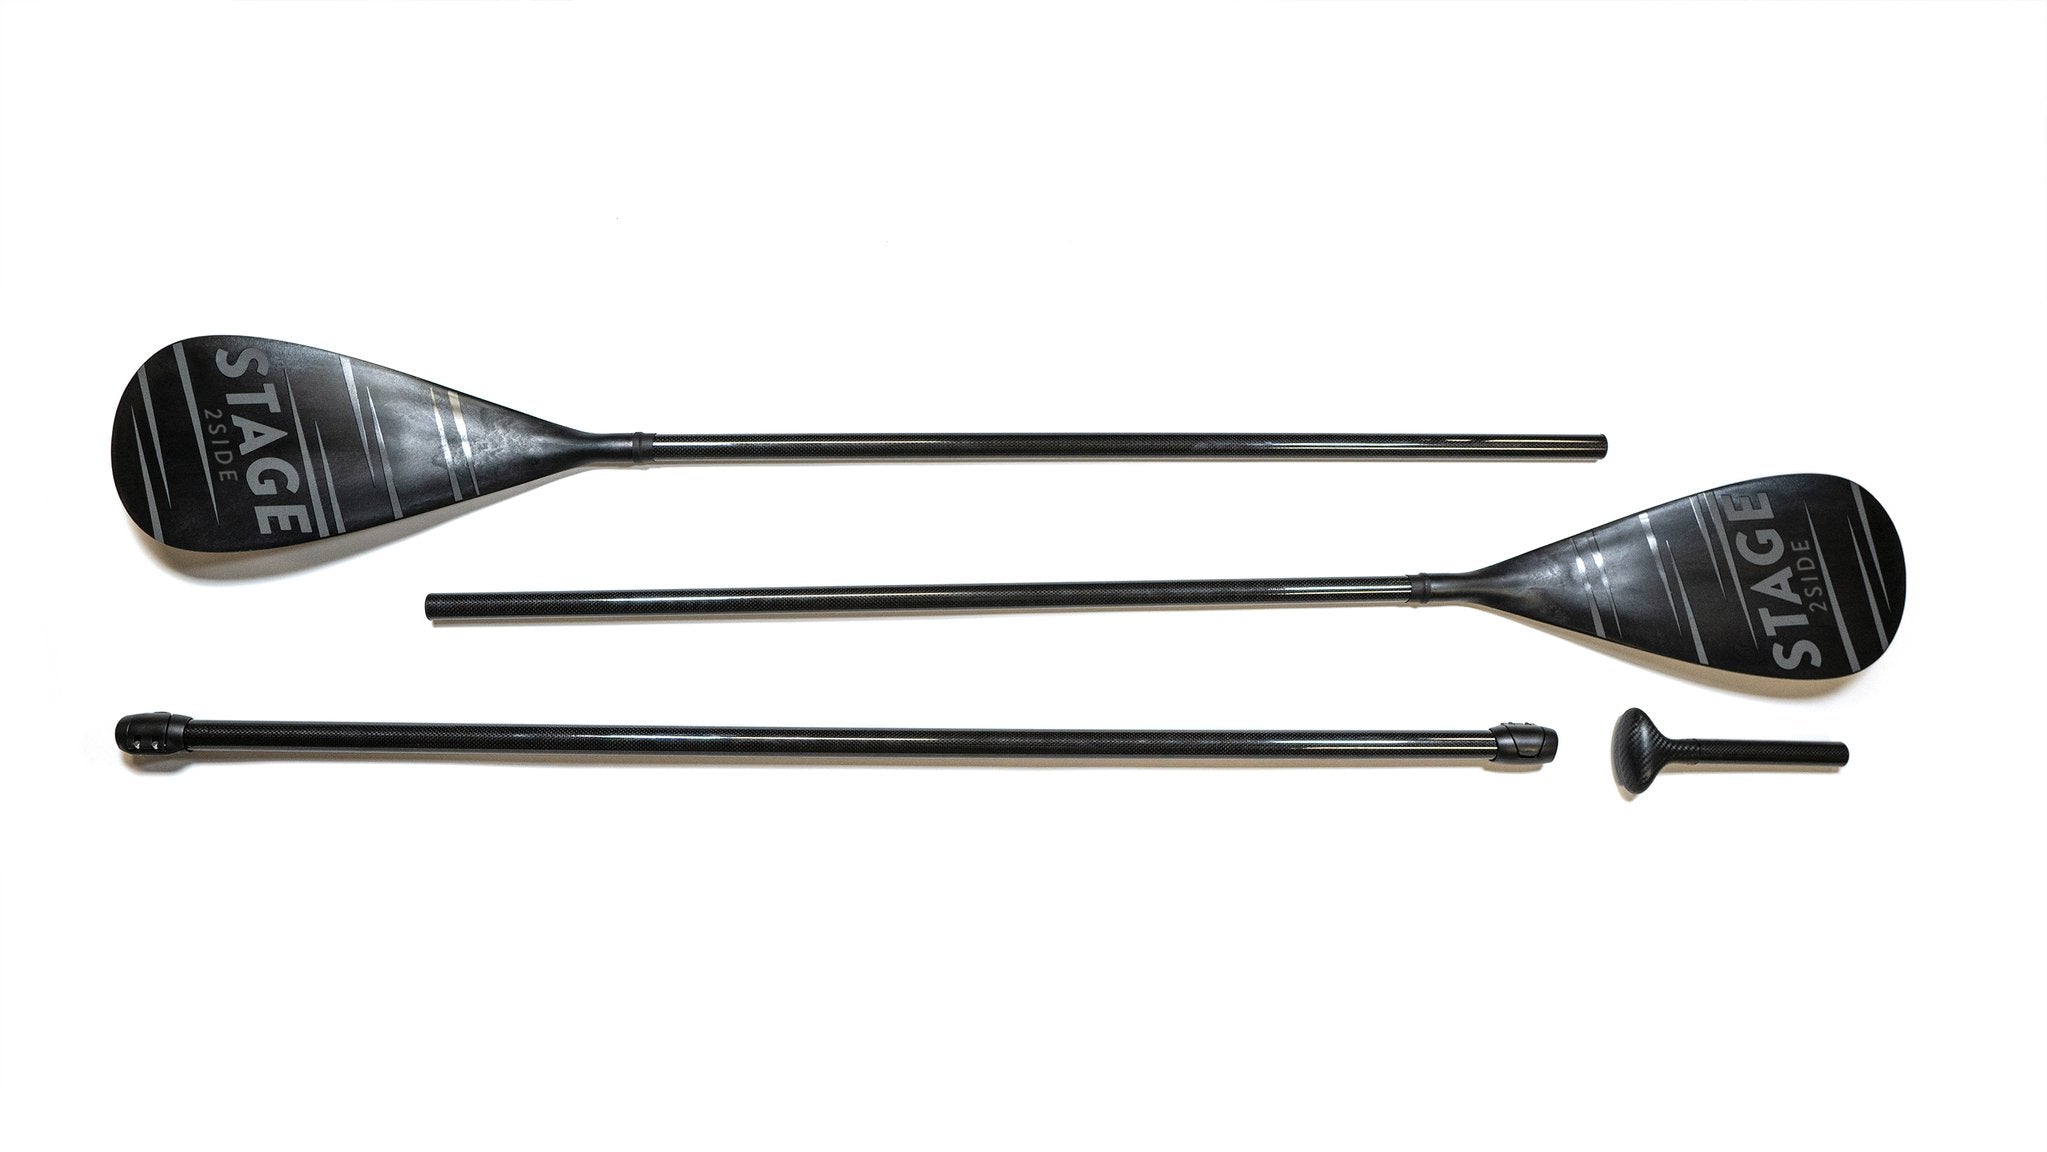 60% Carbon Fiber Composite Shaft reduces weight and adds stiffness Durable PP+Fiber Blades (a blend of polypropylene and fiberglass) Double Paddle Adjusts between 112" to 156" to fit paddlers 5'2 to 6'3 Double Paddle Weighs 3 lbs., 3 oz. Singe Paddle Adjusts from 75 inches to over 90 inches in length! Single Paddle Weighs 2 lbs, 2 oz.